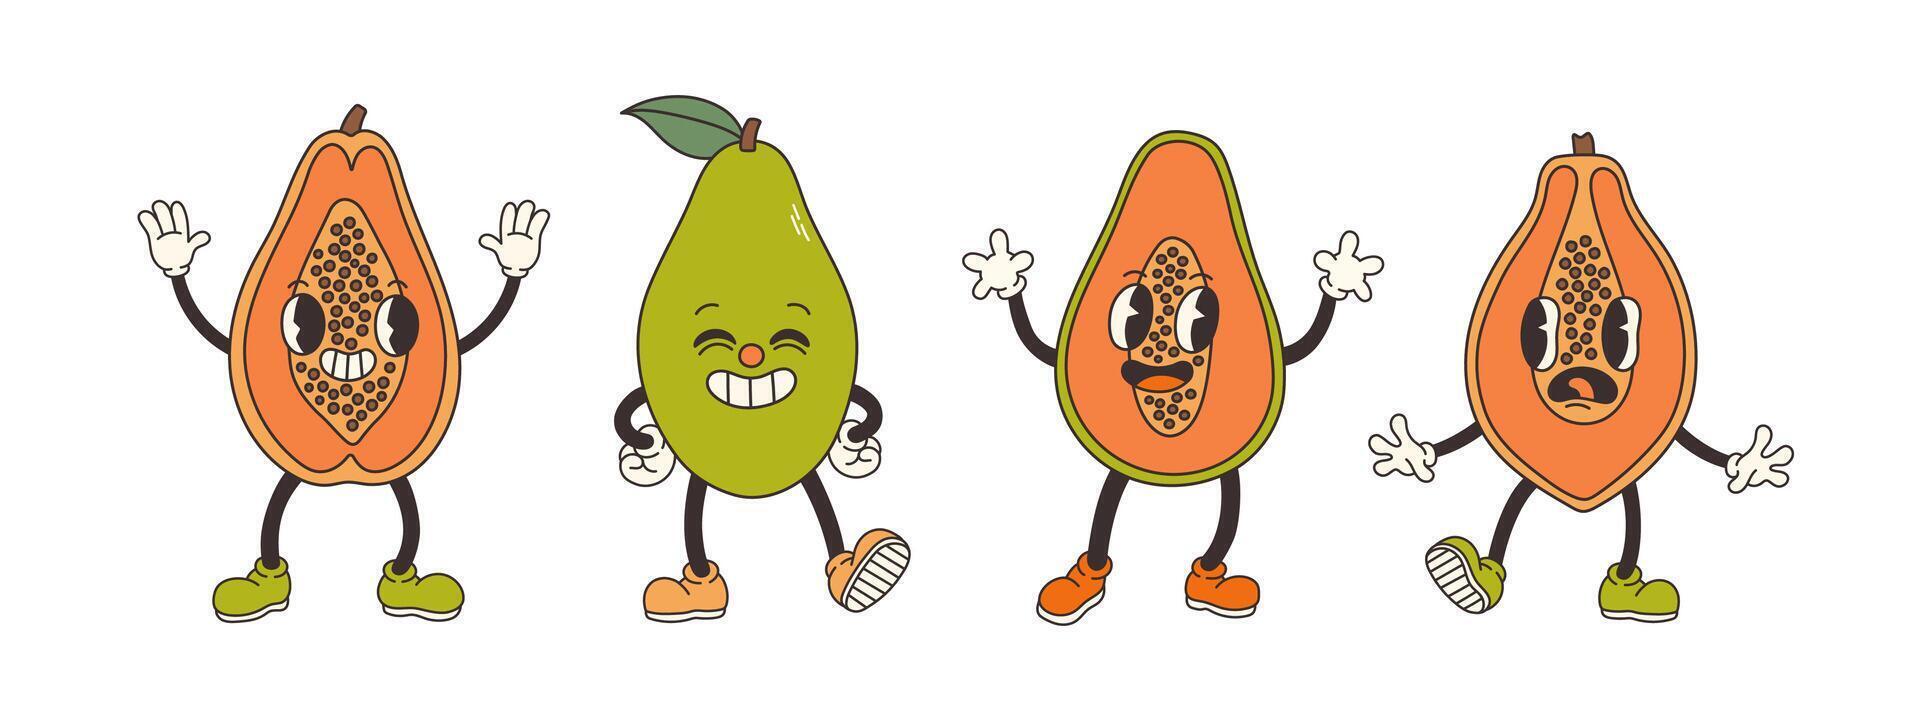 Groovy papaya set. Hand draw Funny Retro vintage trendy style apple cartoon character illustration. Doodle Comic collection. Vector illustration